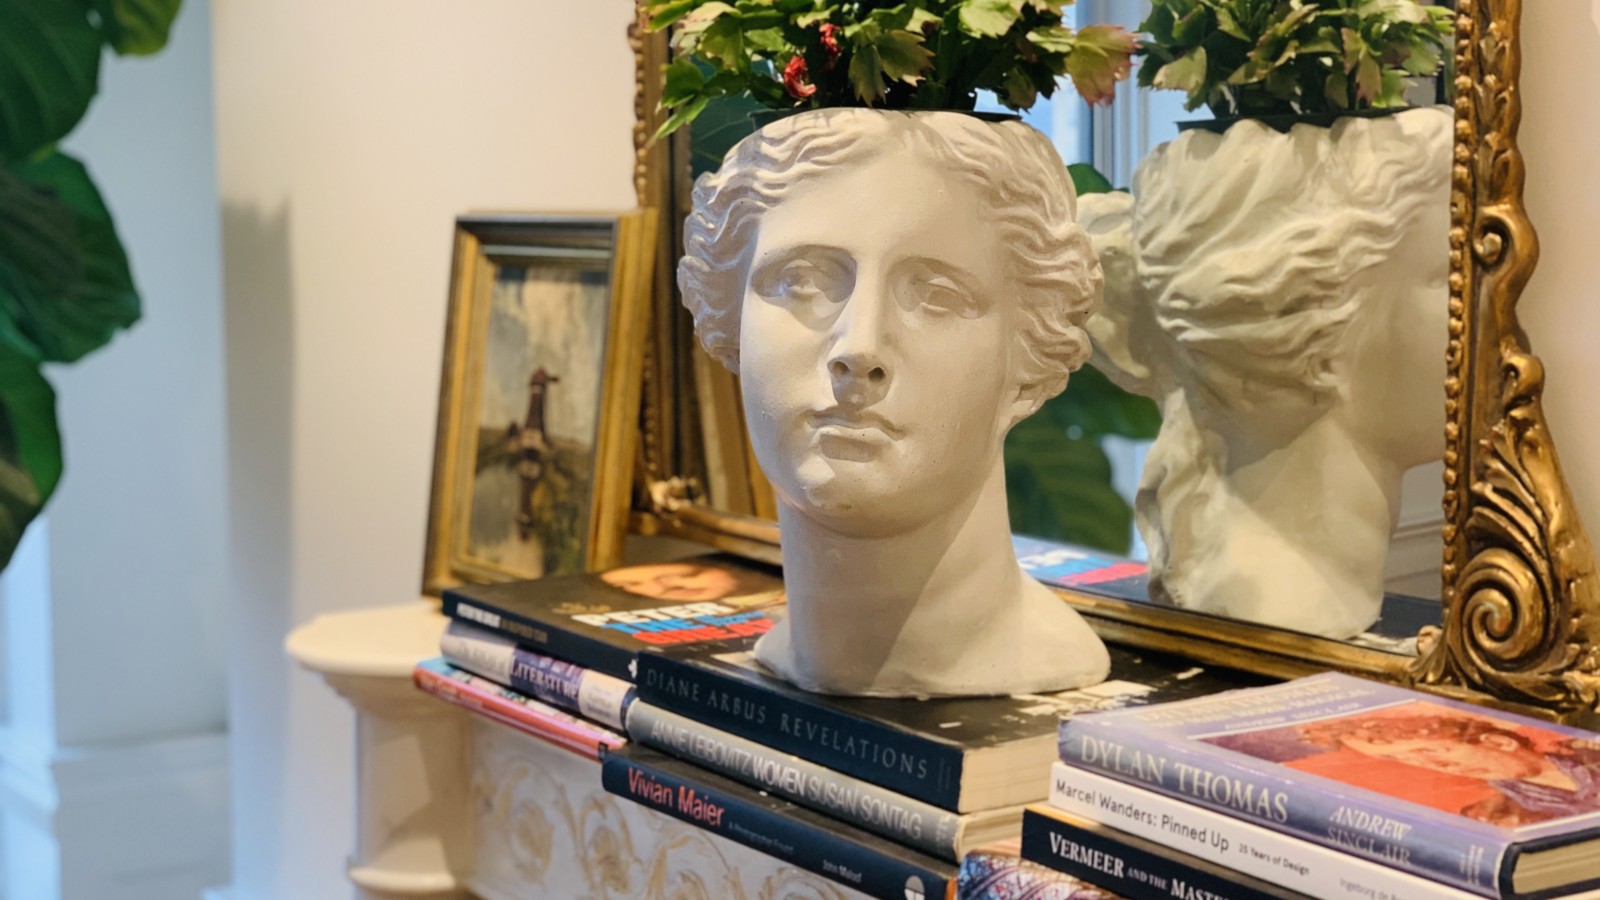 Planter bust on top of stack of coffee table books in front of mirror.